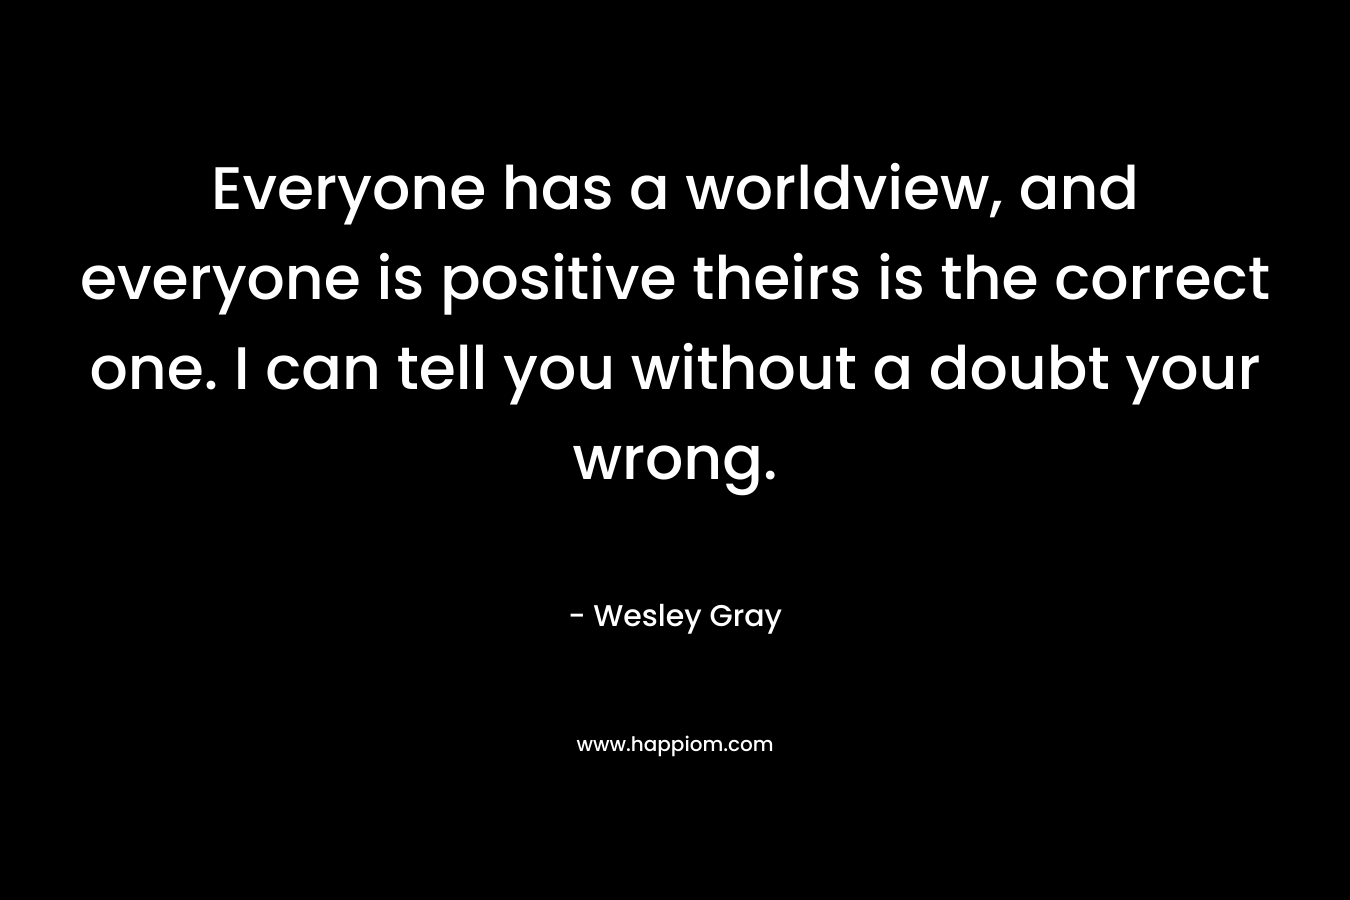 Everyone has a worldview, and everyone is positive theirs is the correct one. I can tell you without a doubt your wrong. – Wesley Gray